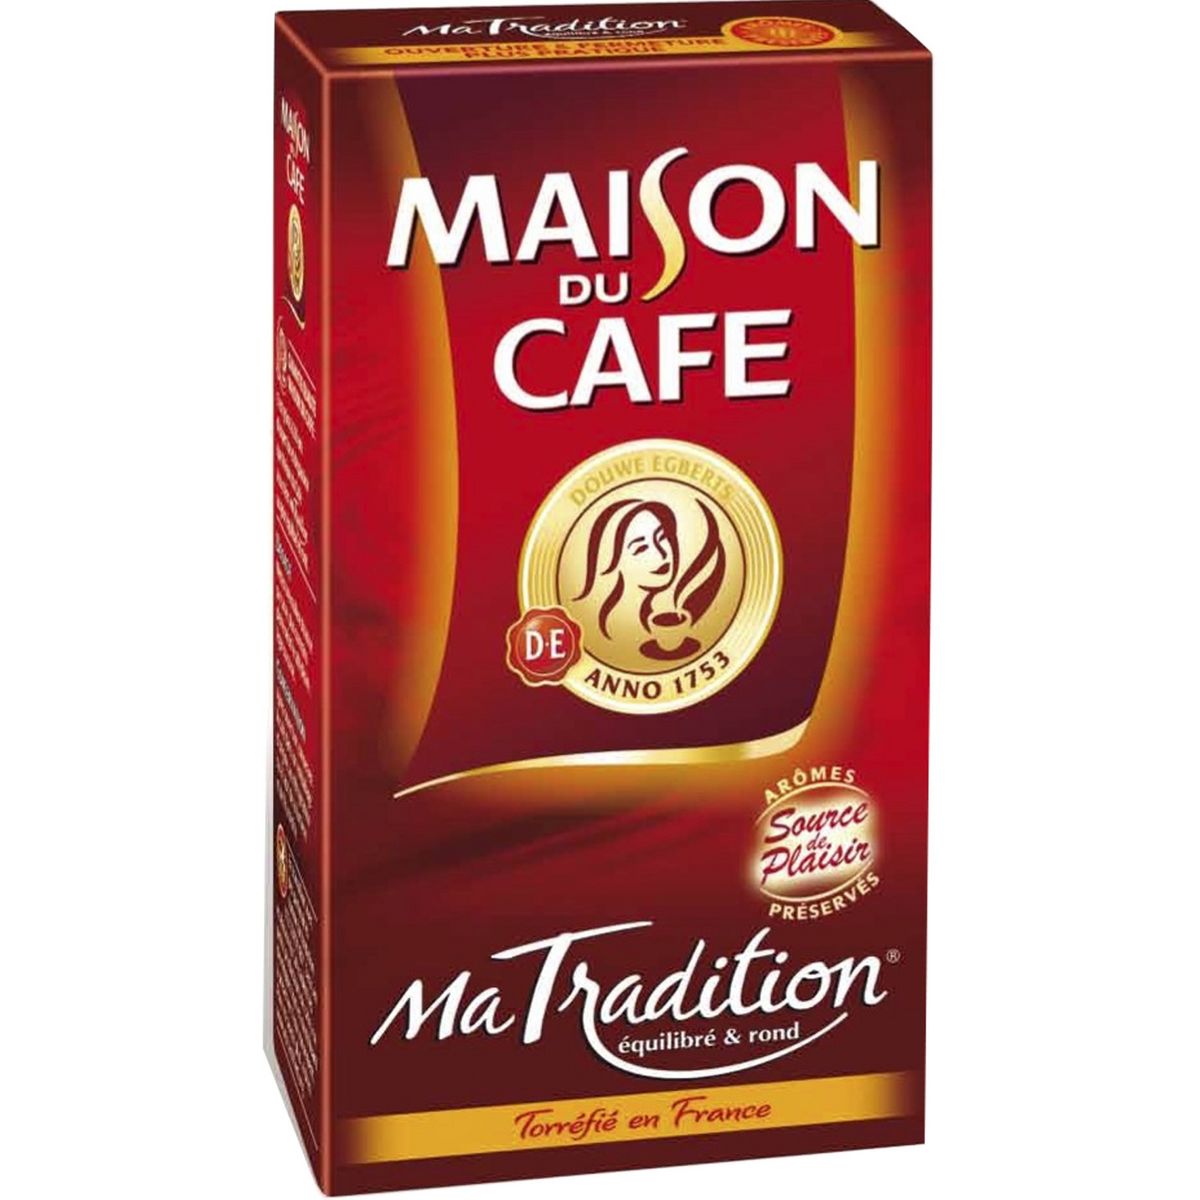 Maison du Cafe tradition ground coffee 250g